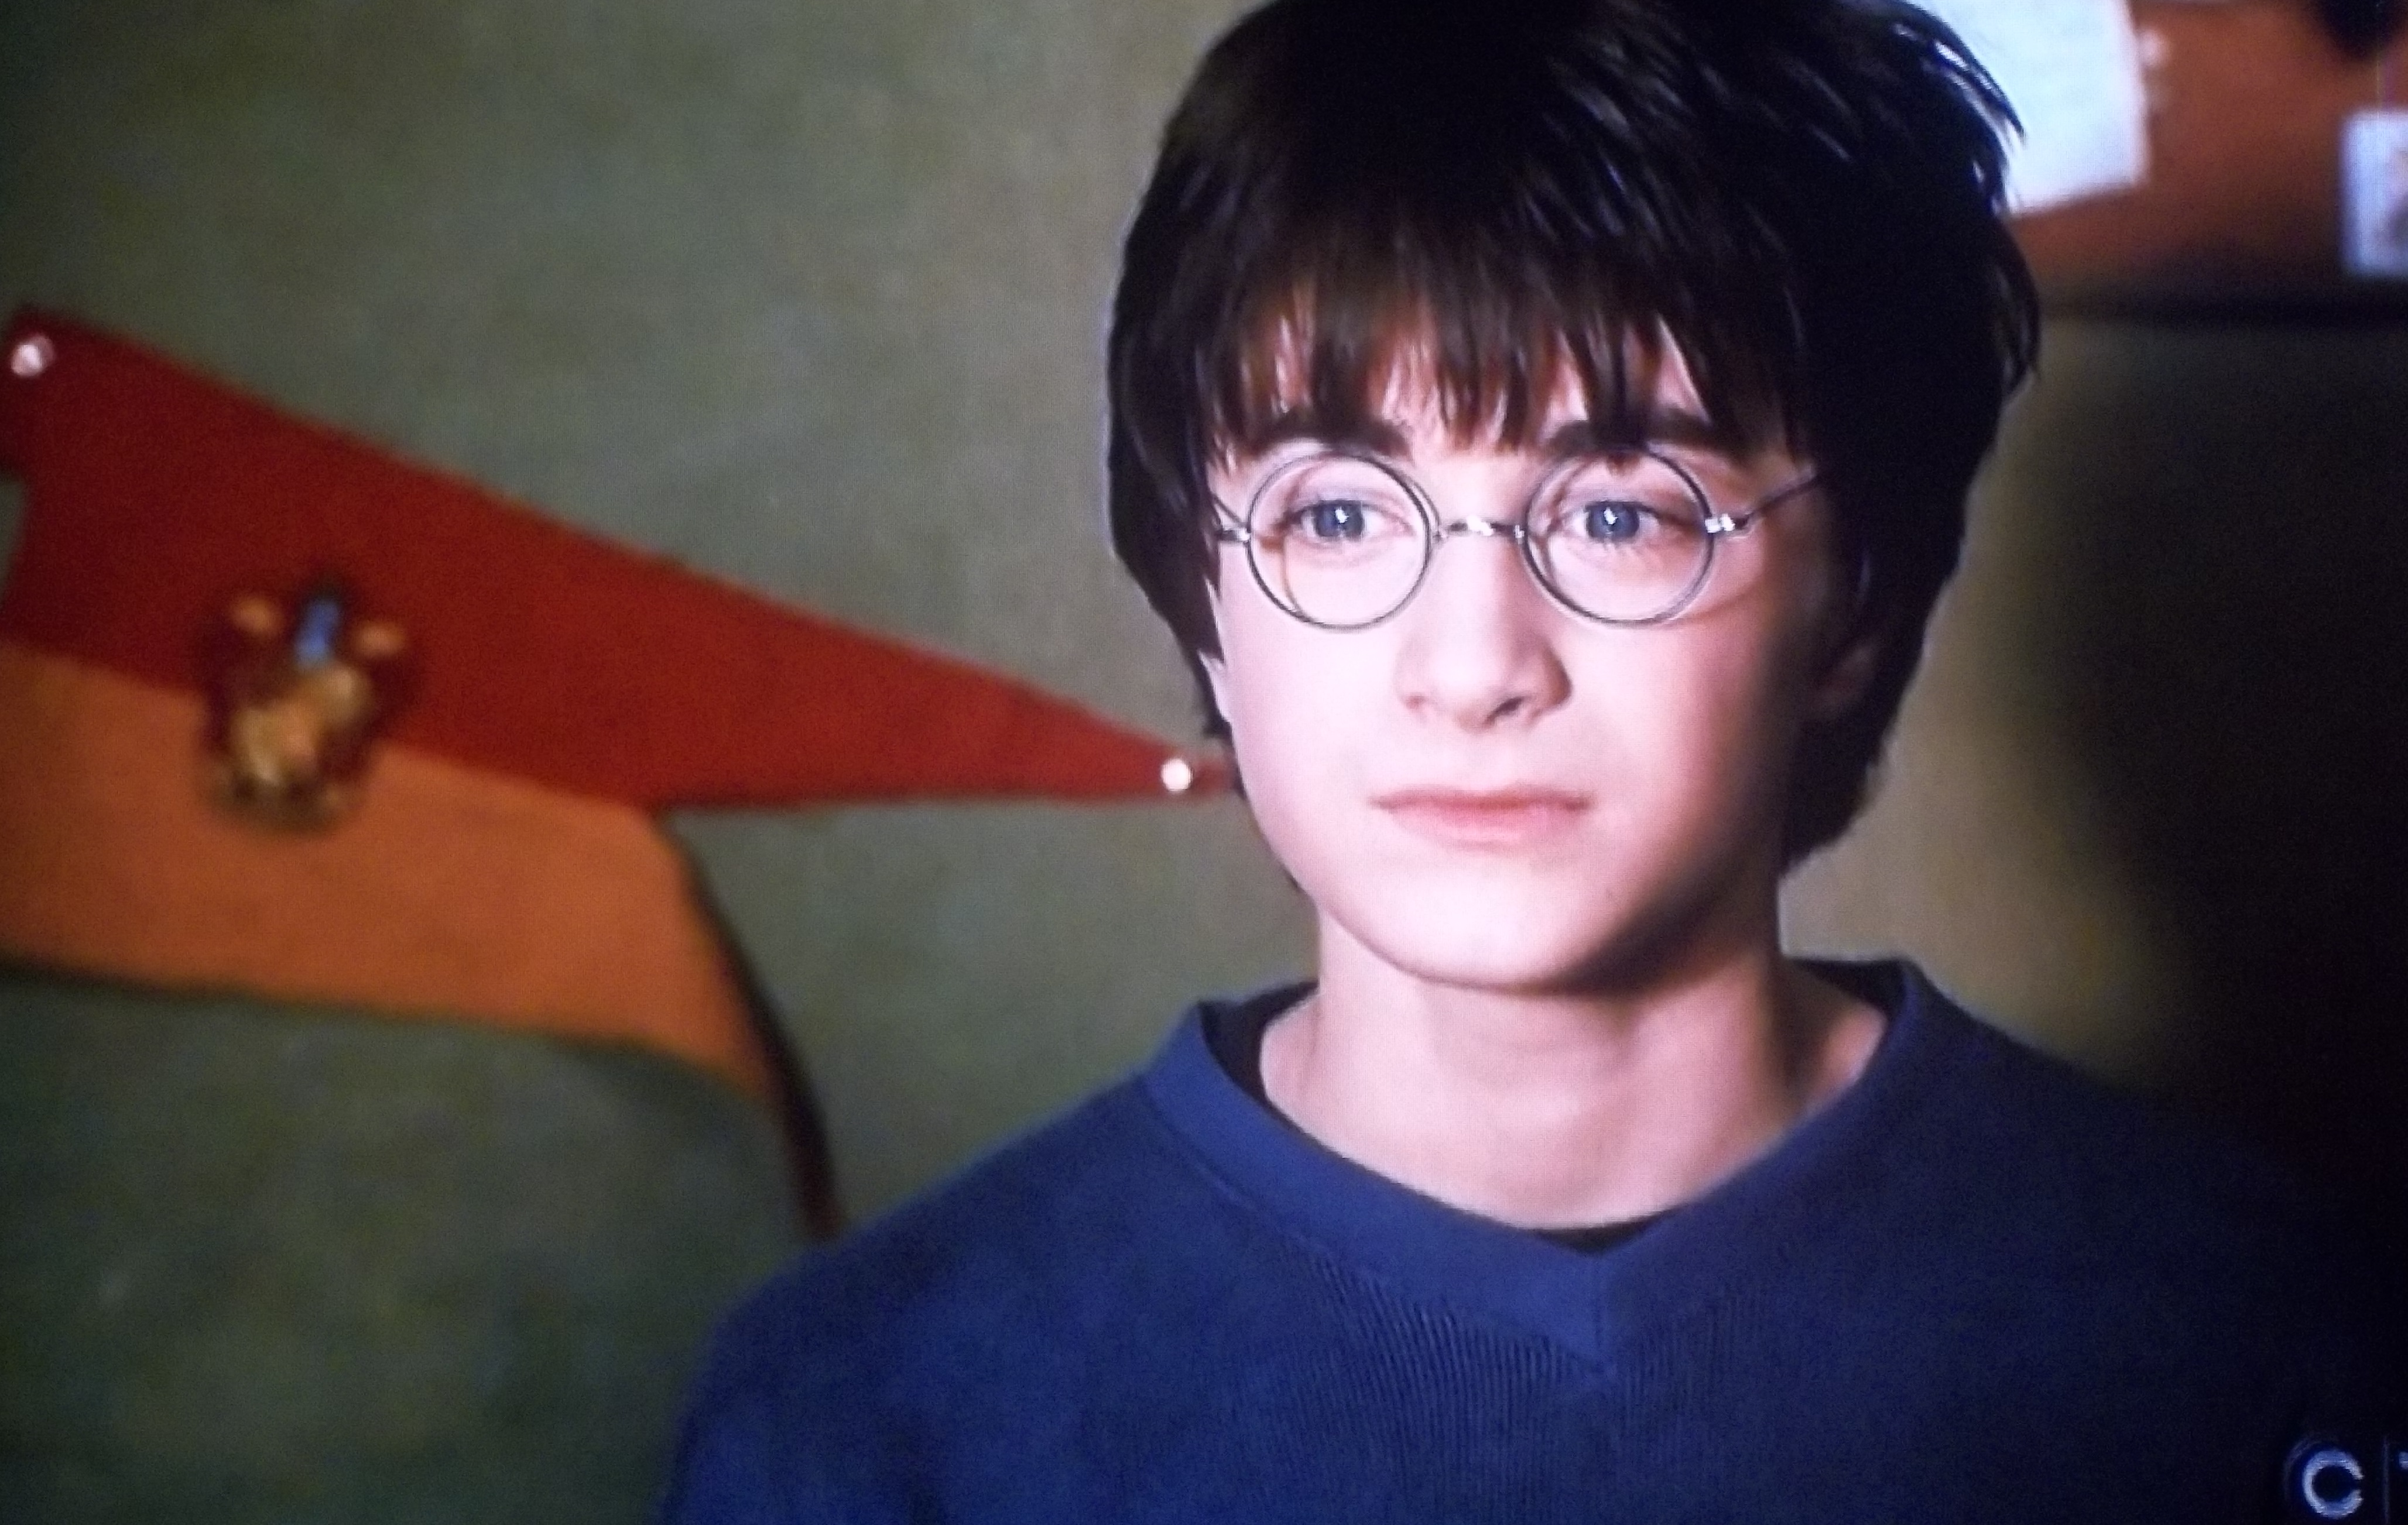 Daniel Radcliffe in Harry Potter and the Chamber of Secrets